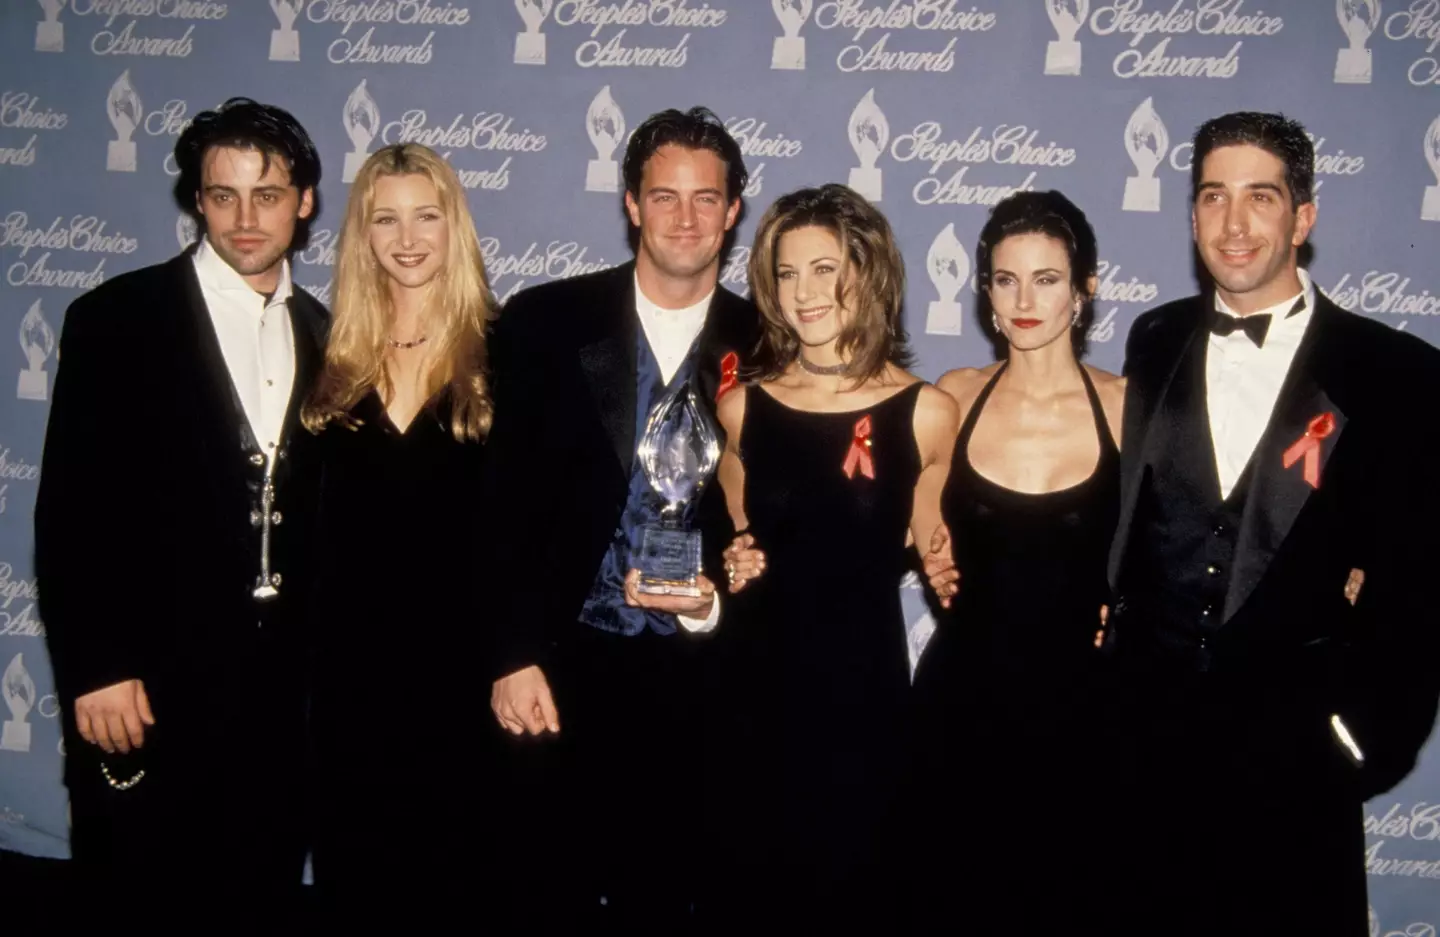 Matthew Perry sadly passed away in October.